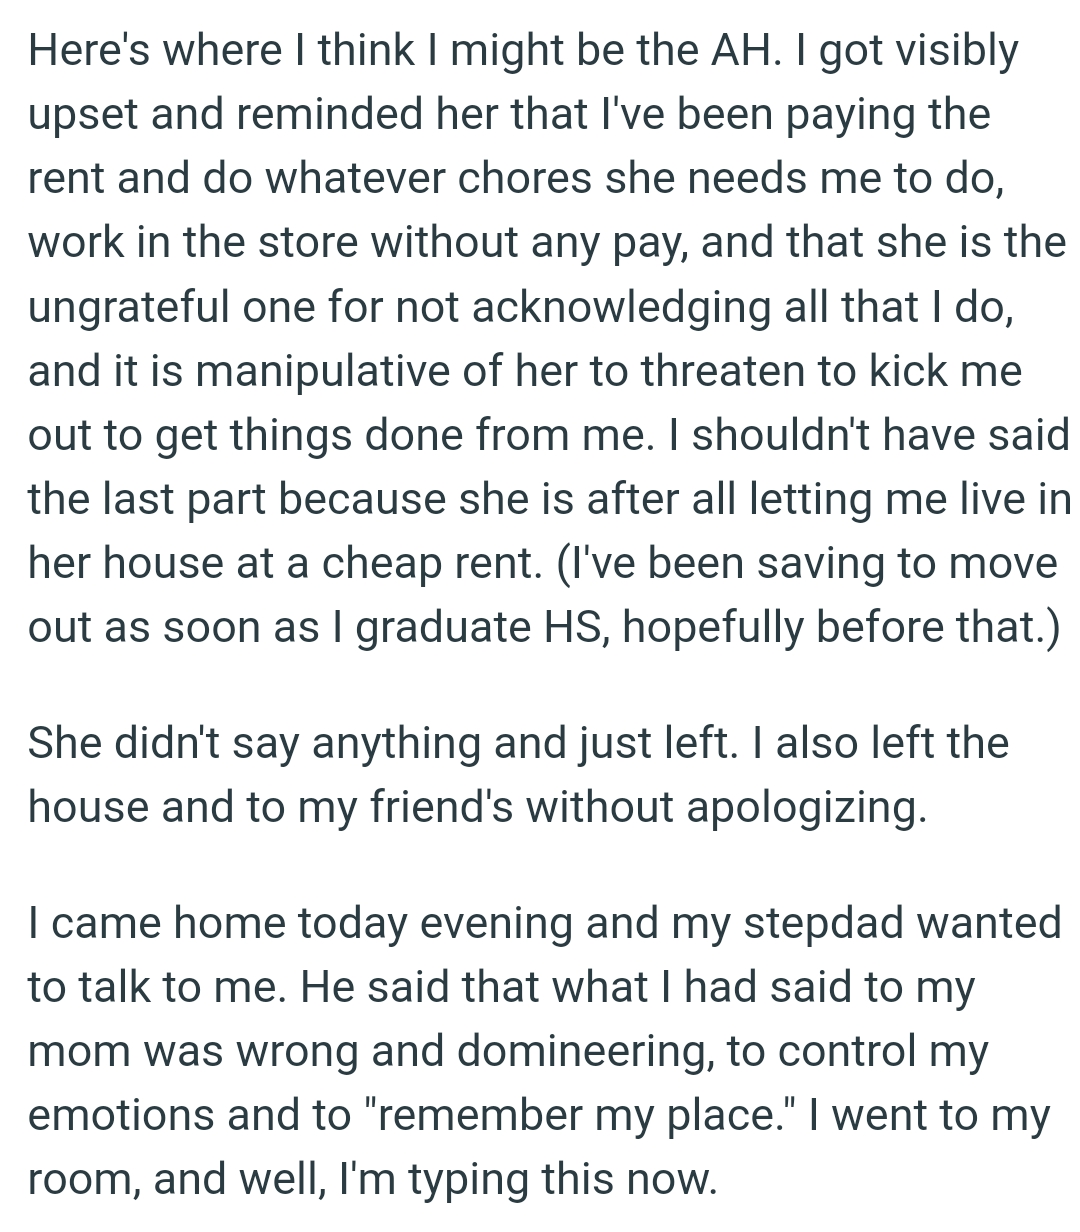 The OP left the house and to his friend's without apologizing